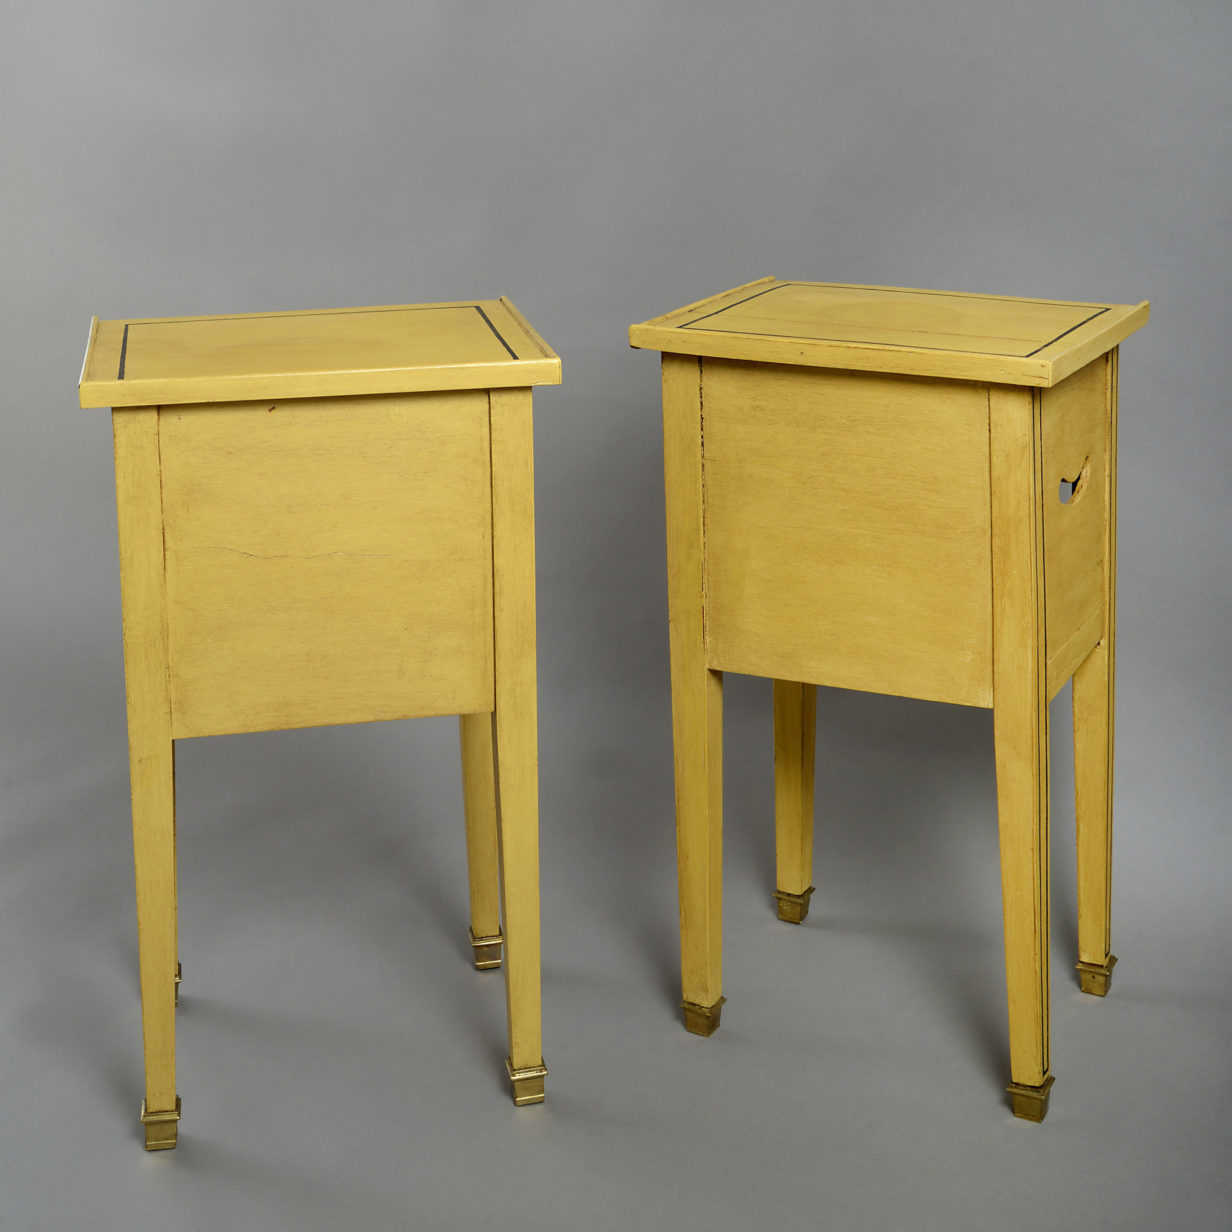 A pair of 19th century painted bedside tables